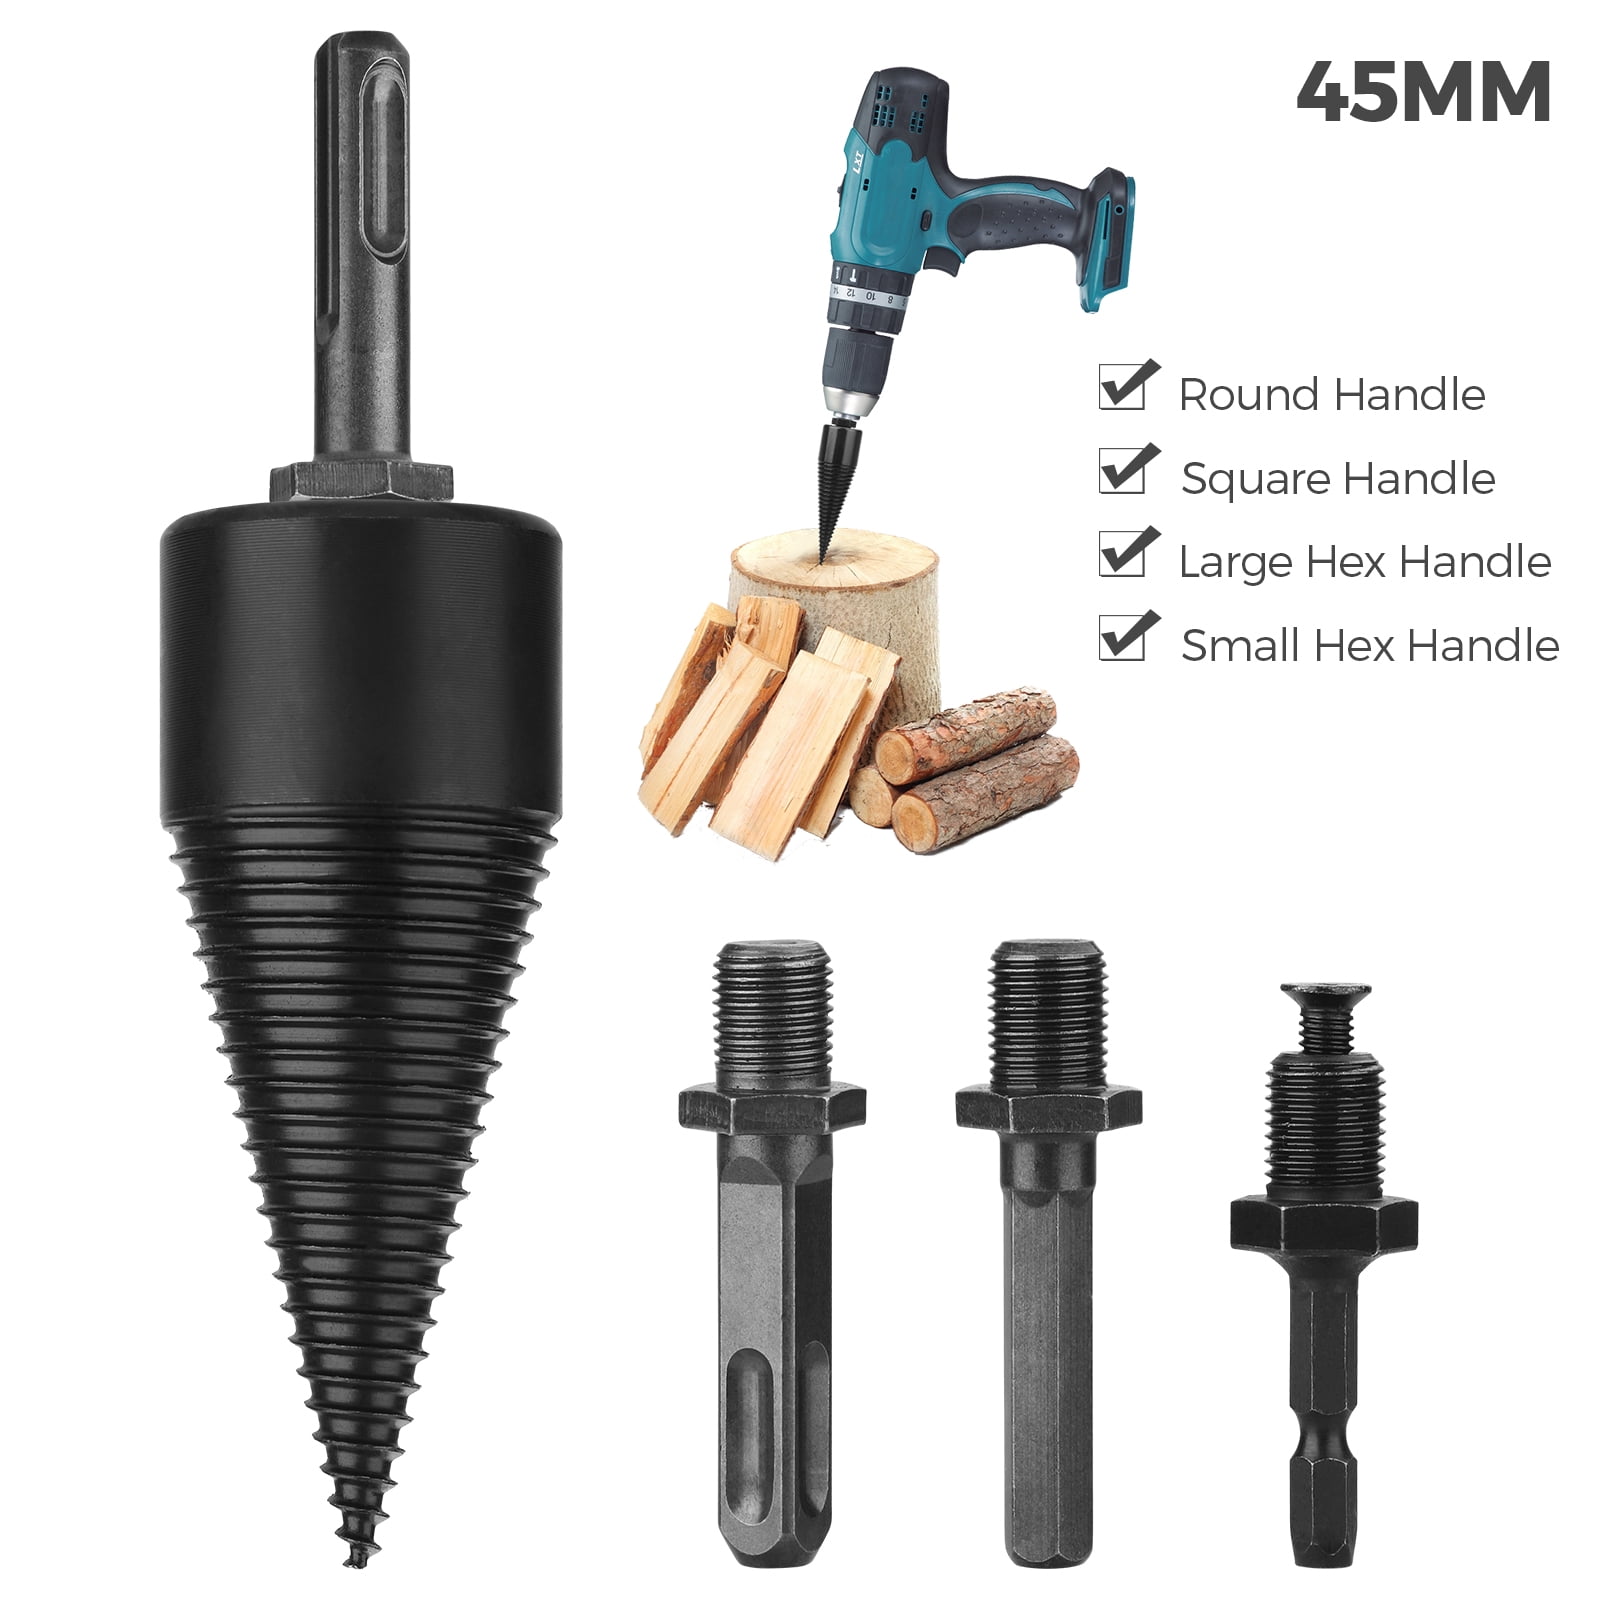 HSS Step Cone Drill Bit Triangle Shank Spiral Grooved Hole Cutter Tool 10-45mm 